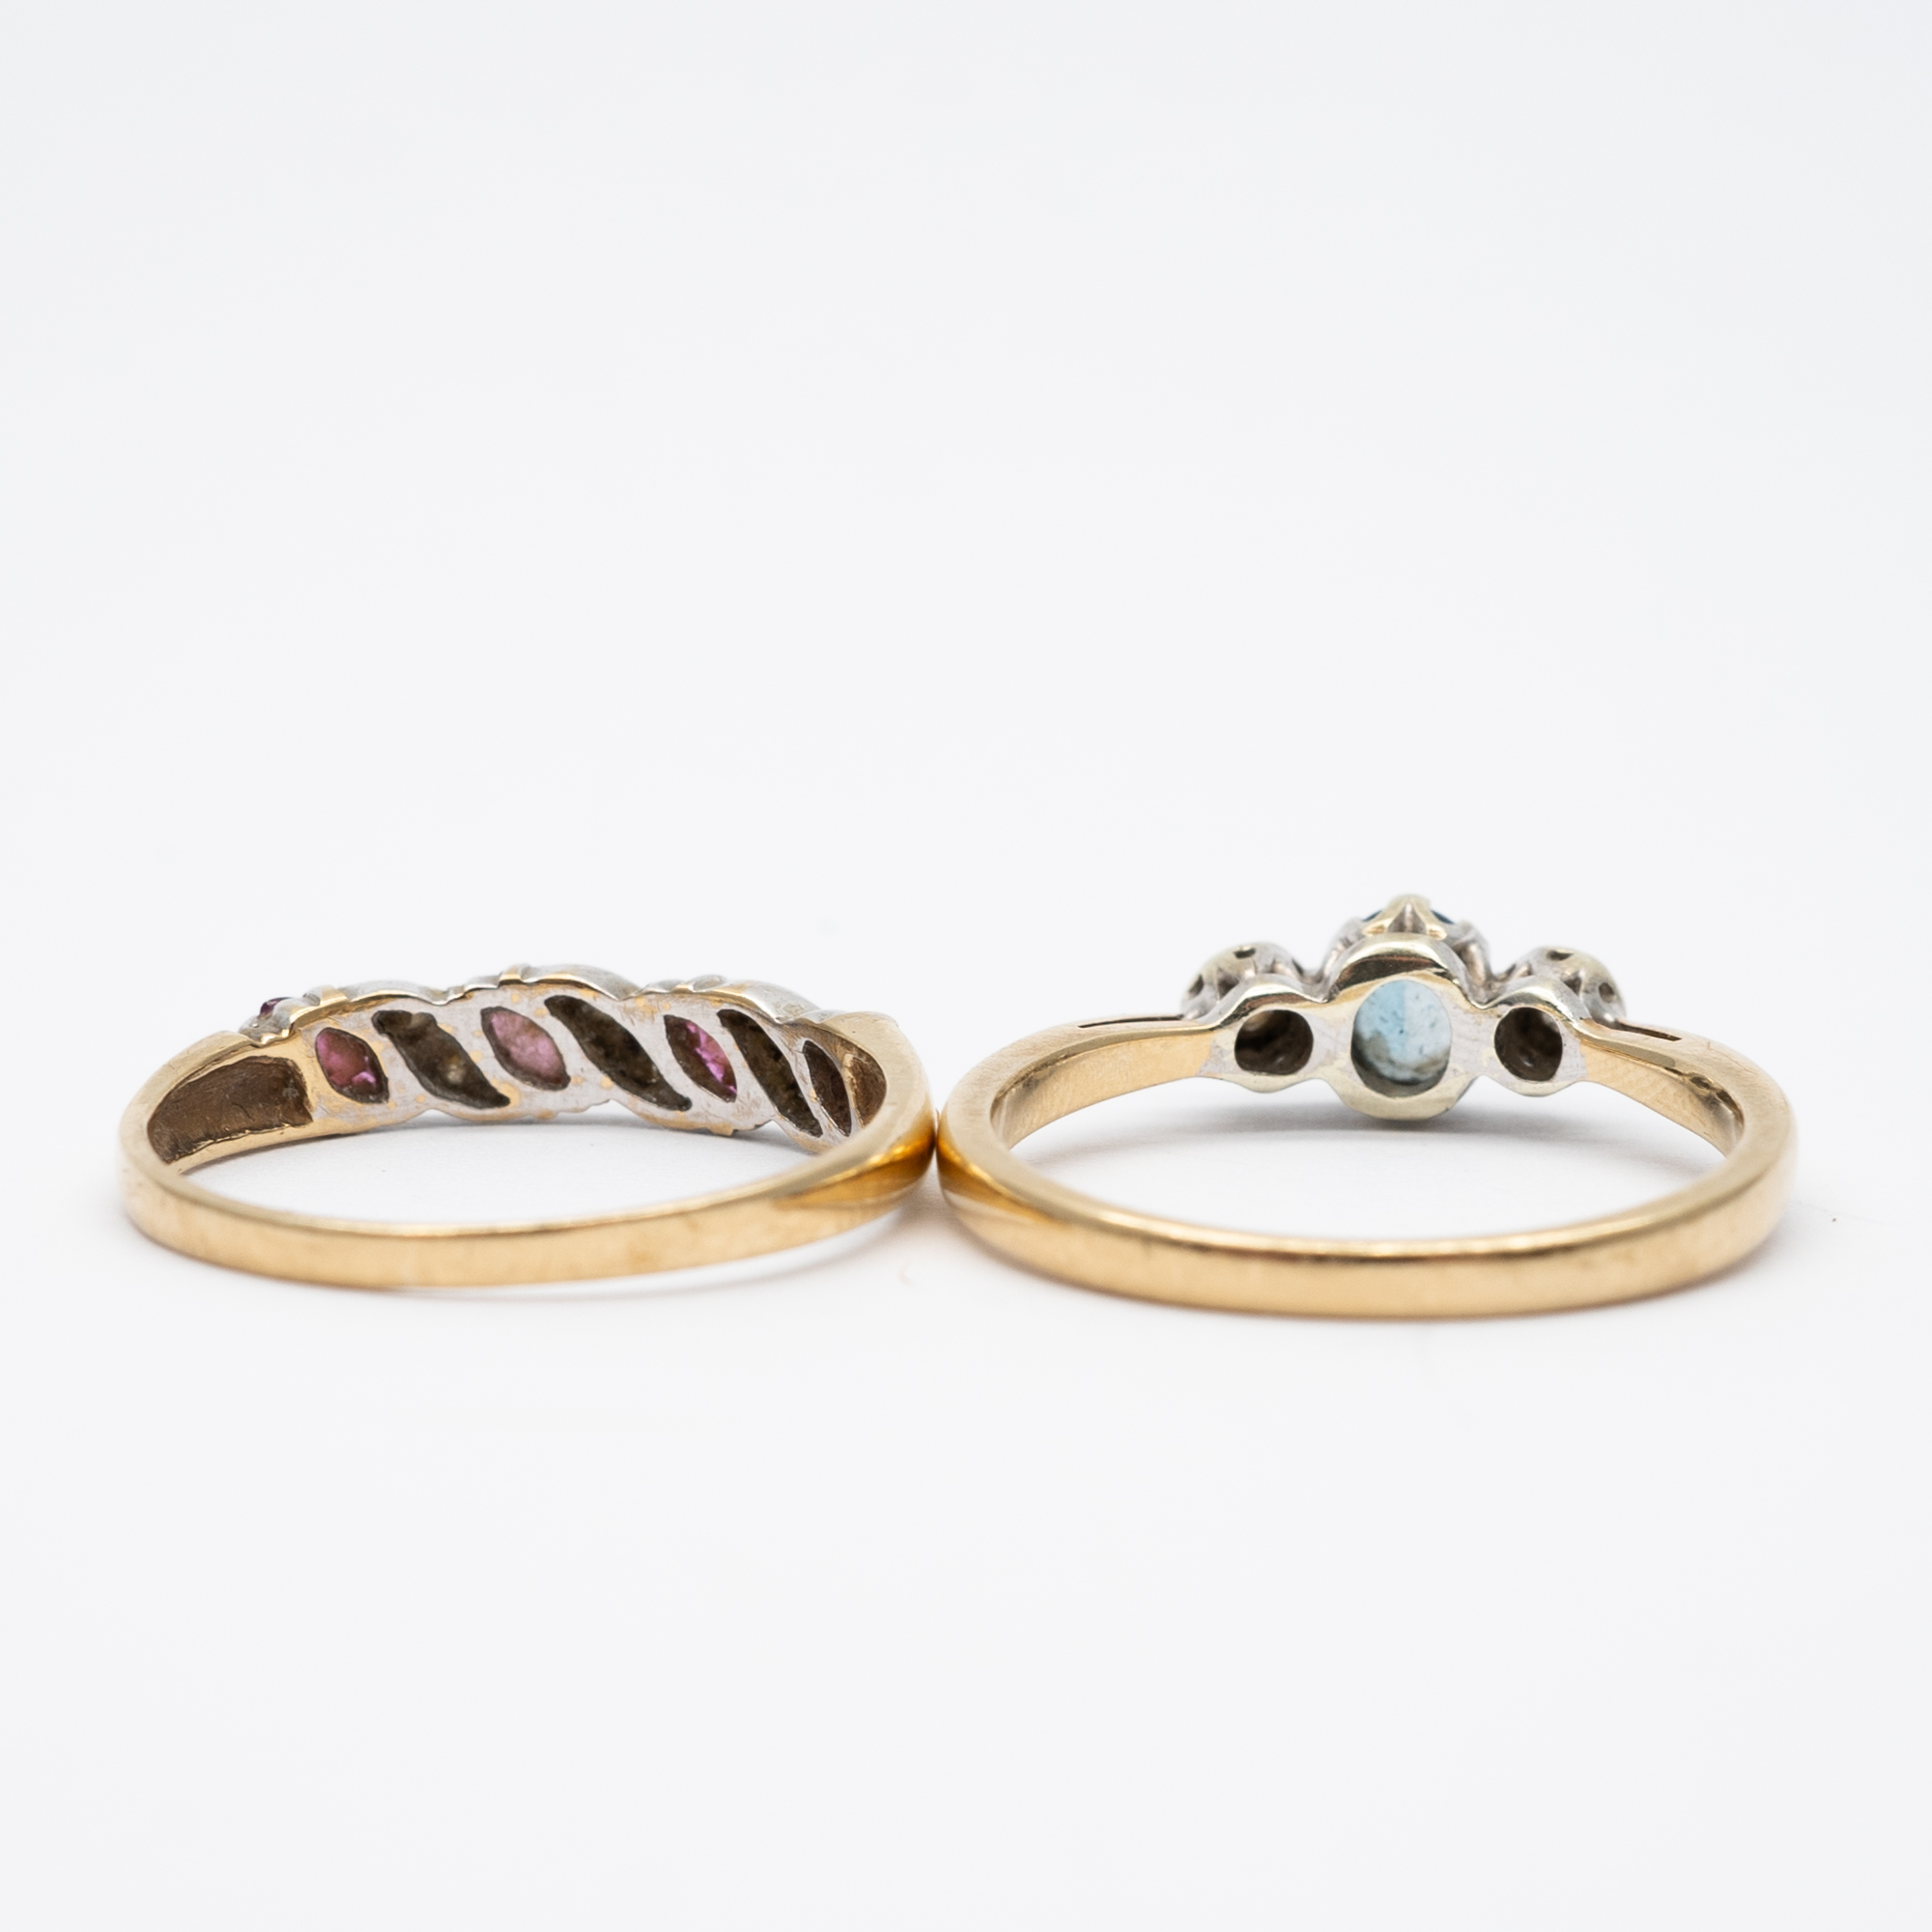 2x 9ct yellow gold dress rings - Image 3 of 4